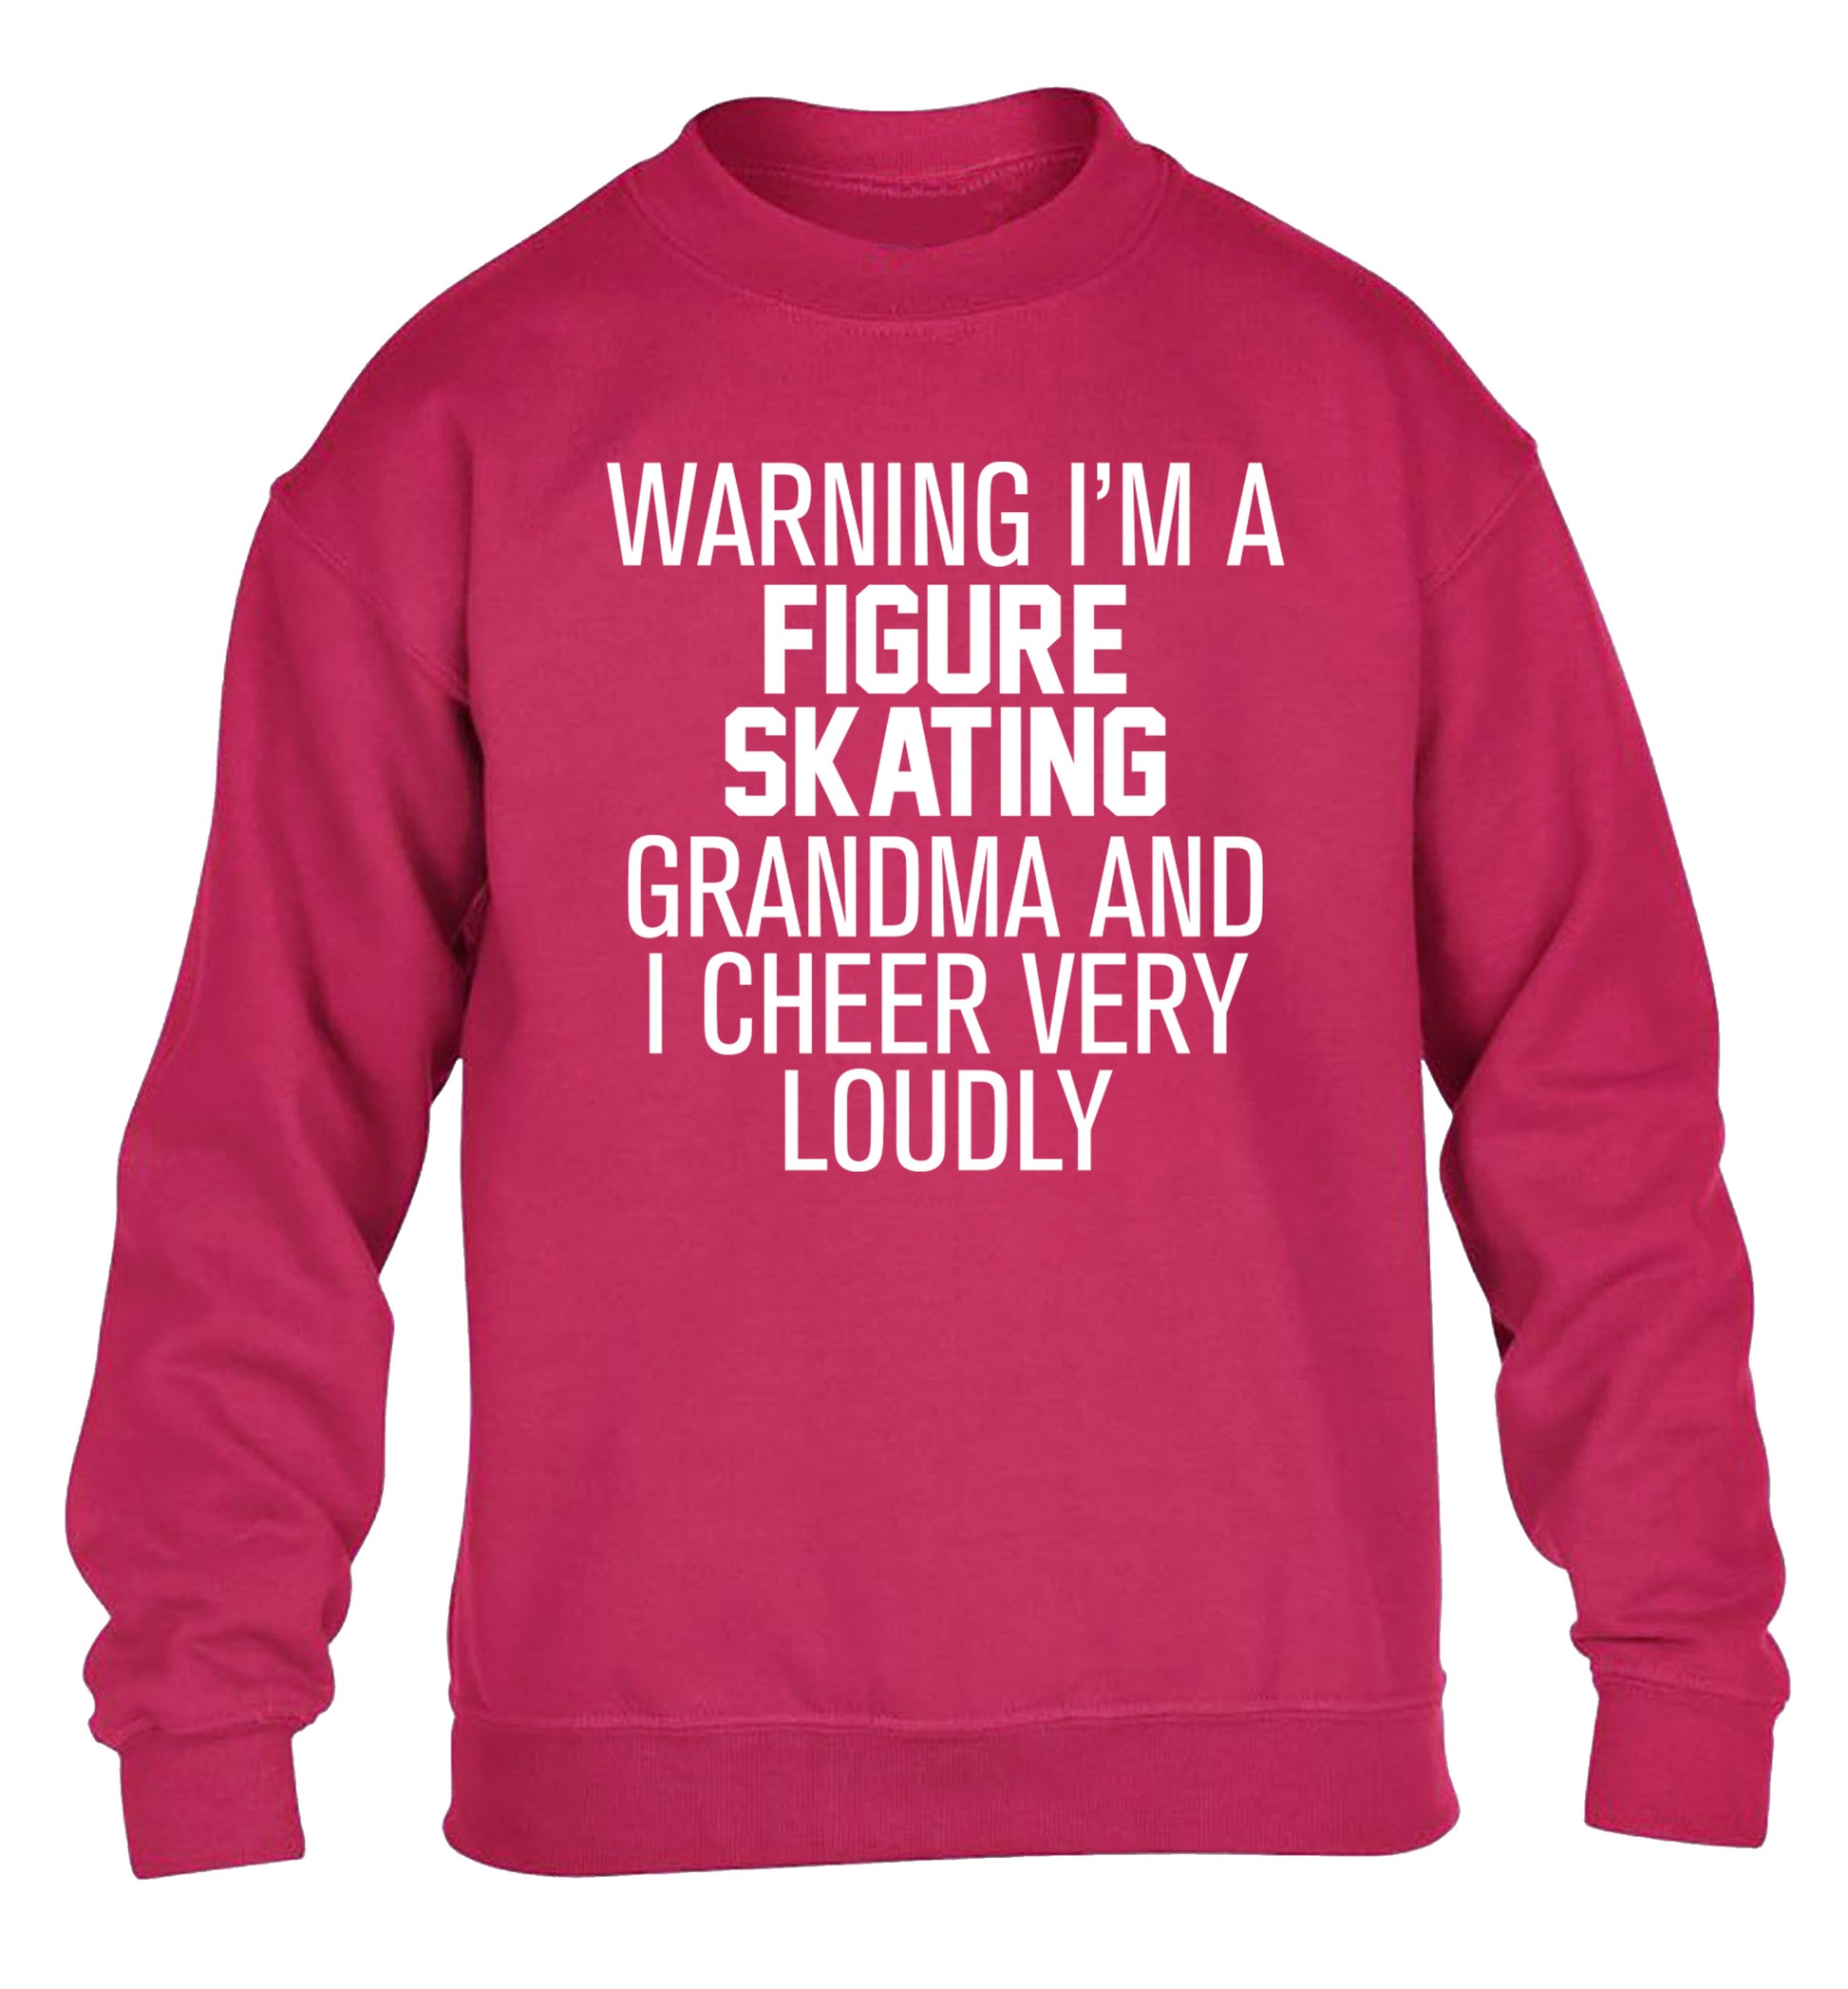 Warning I'm a figure skating grandma and I cheer very loudly children's pink sweater 12-14 Years